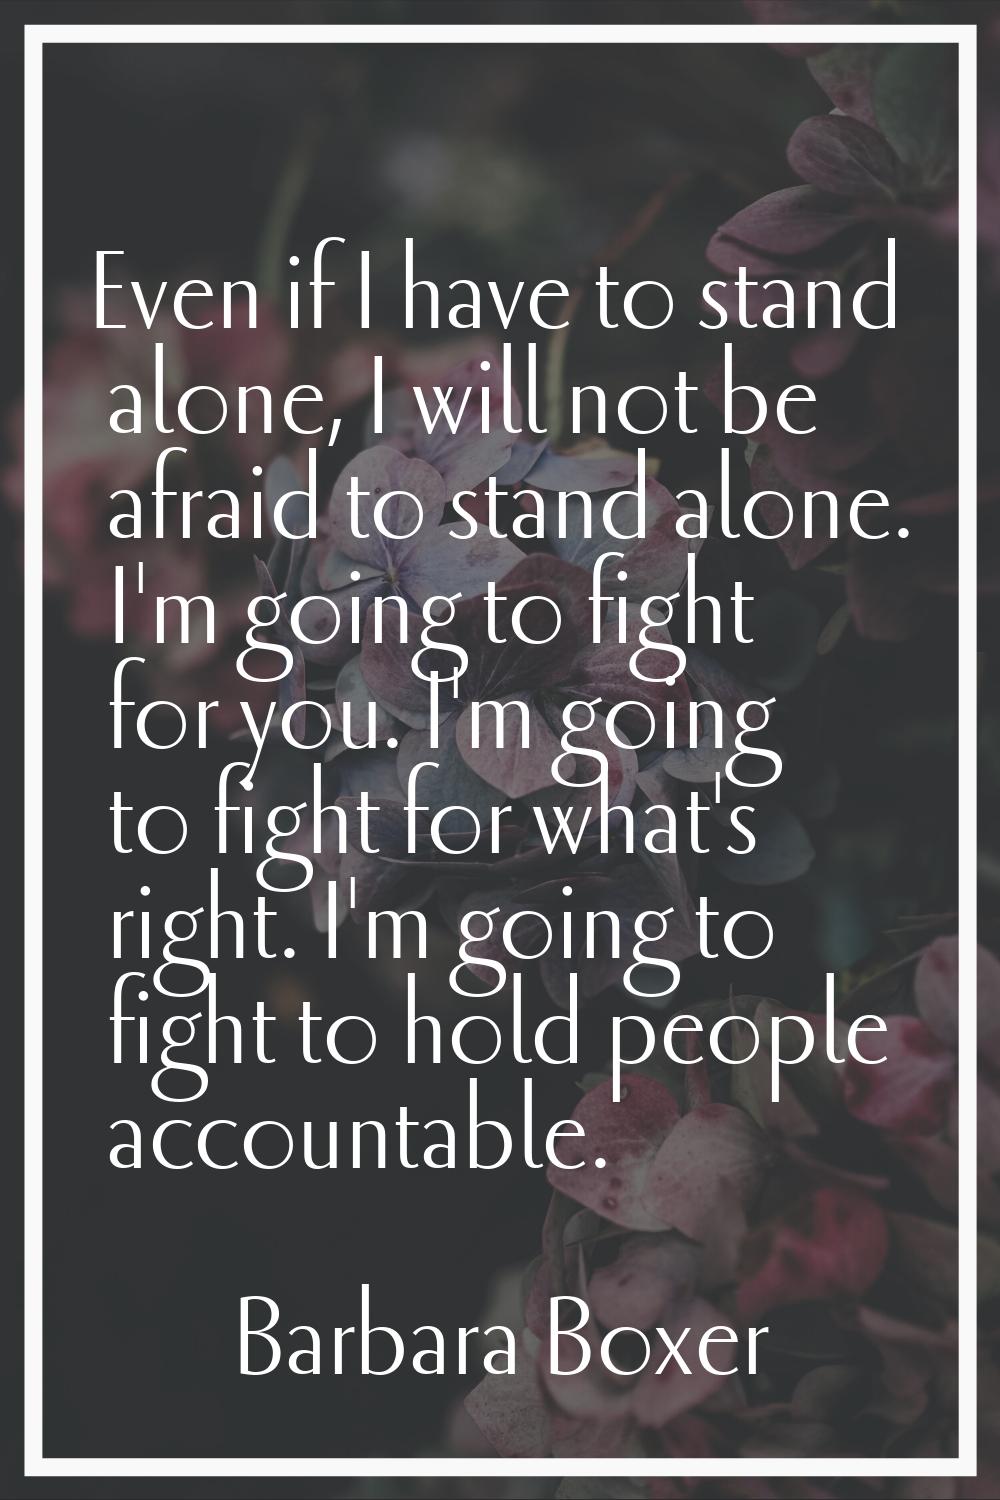 Even if I have to stand alone, I will not be afraid to stand alone. I'm going to fight for you. I'm